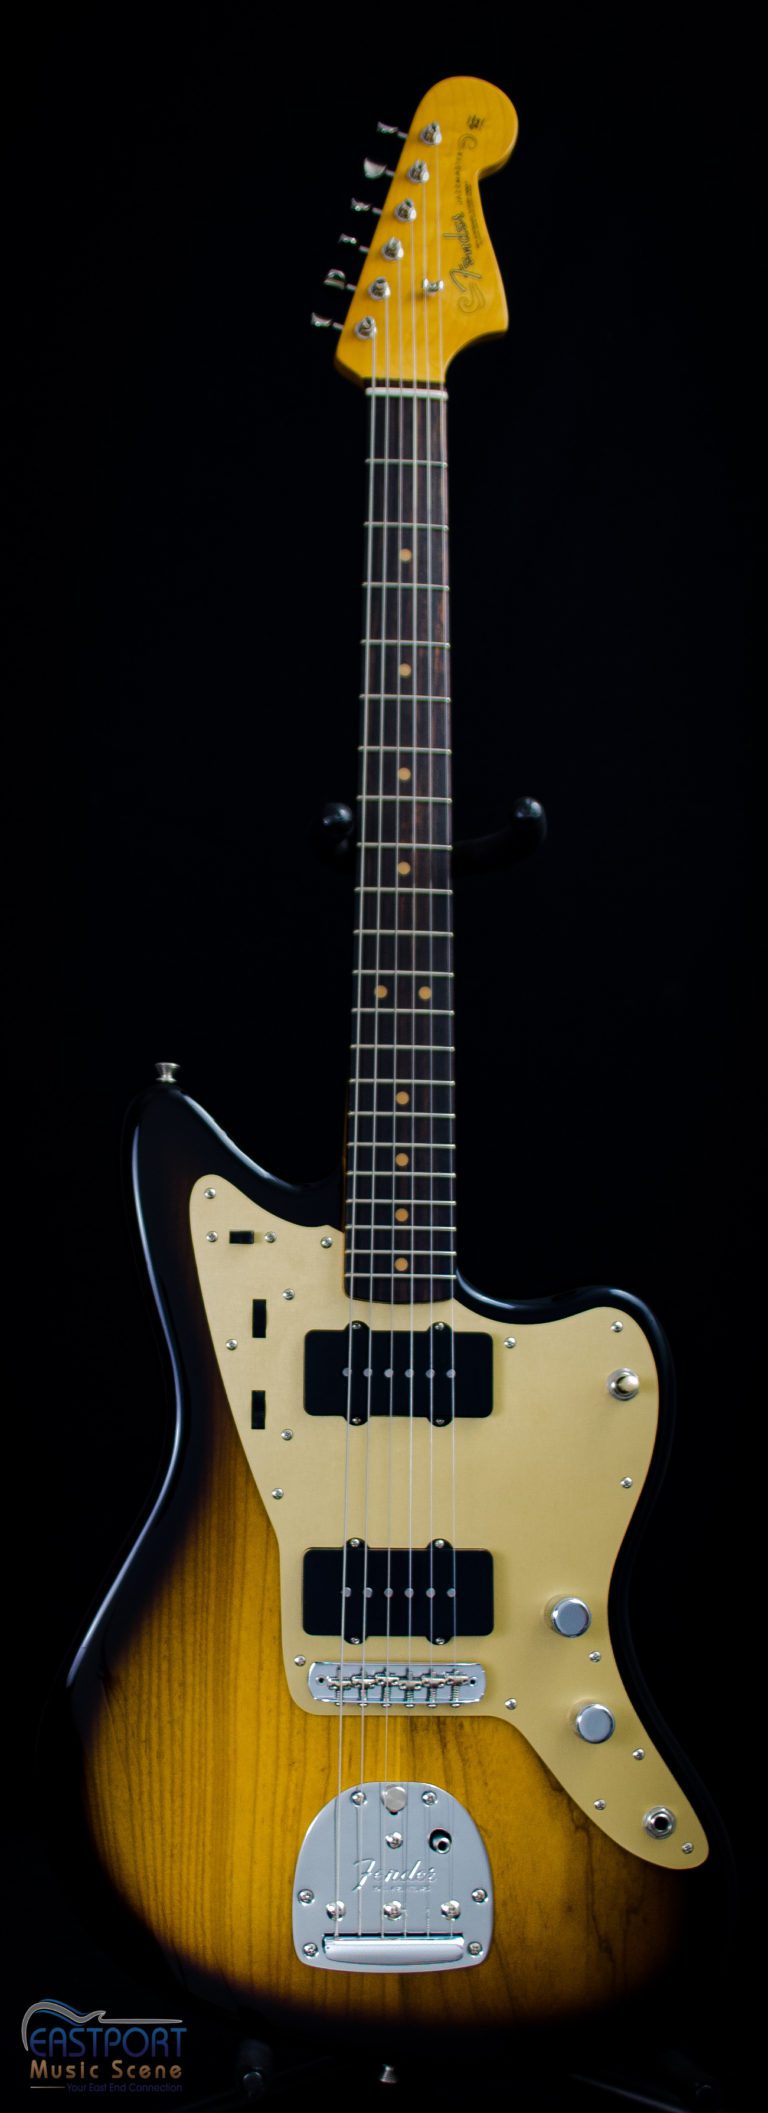 A black and white guitar is sitting in front of a black background.